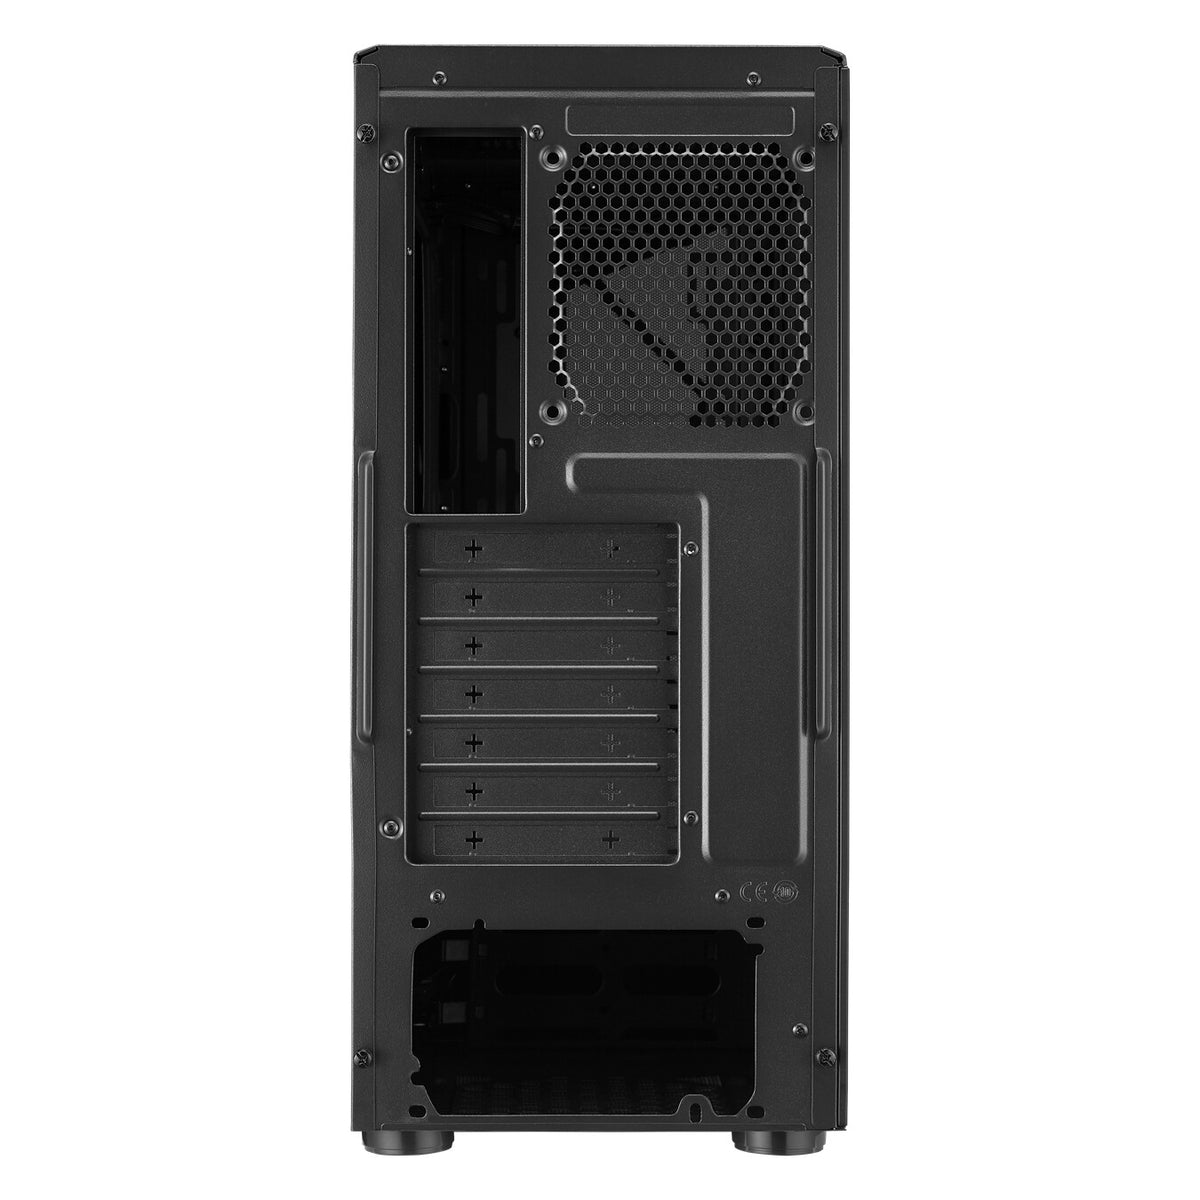 Cooler Master CMP 510 - ATX Mid Tower Case in Black